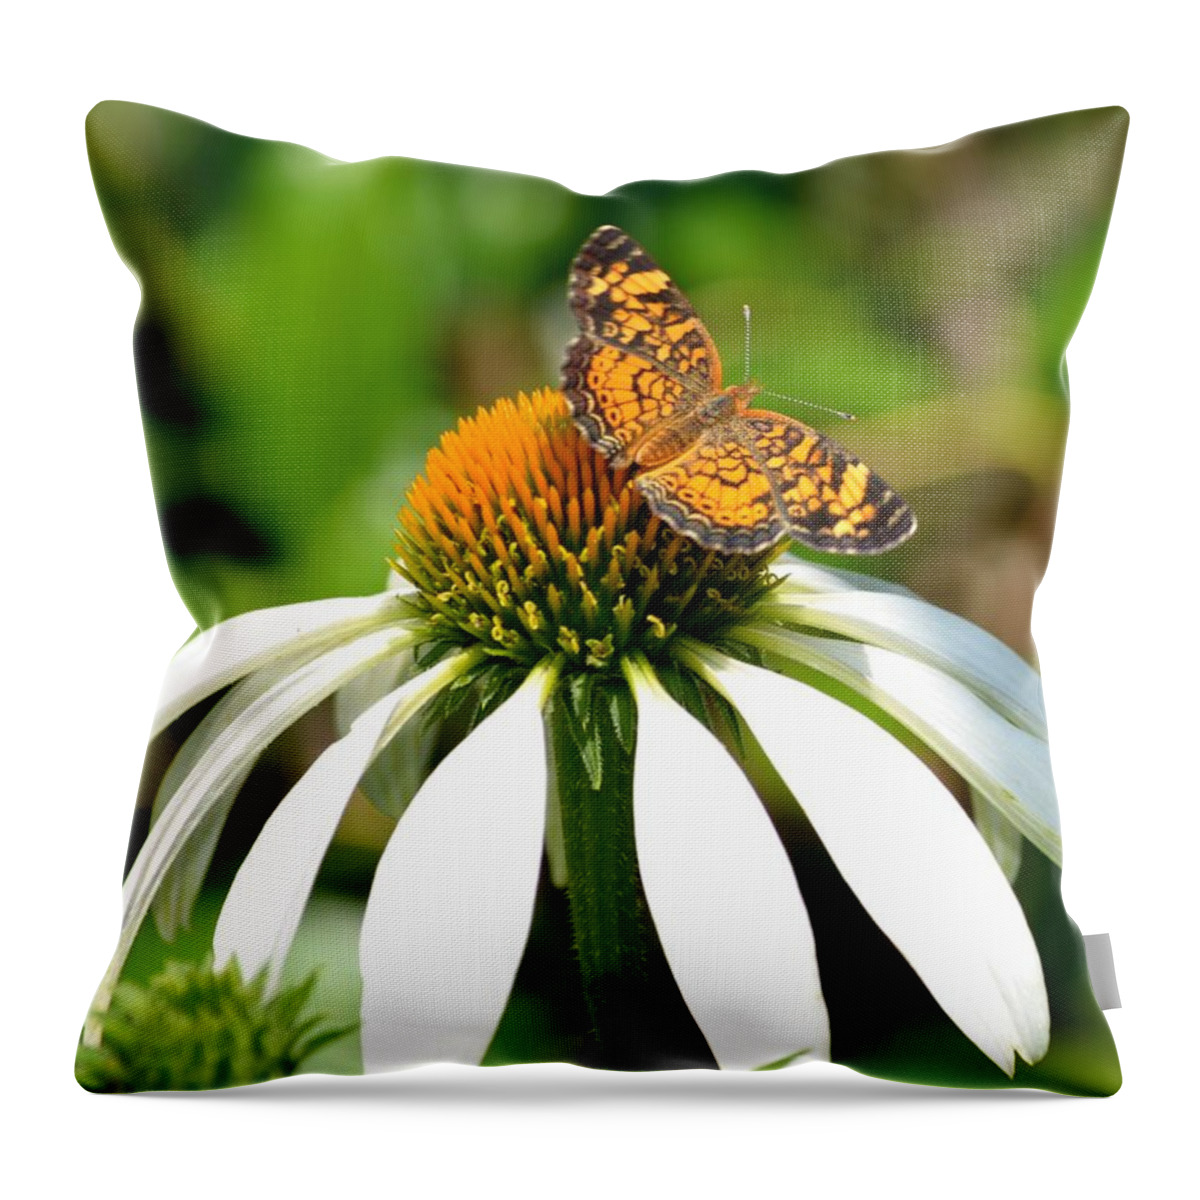 Showoff Throw Pillow featuring the photograph Show Off by Maria Urso